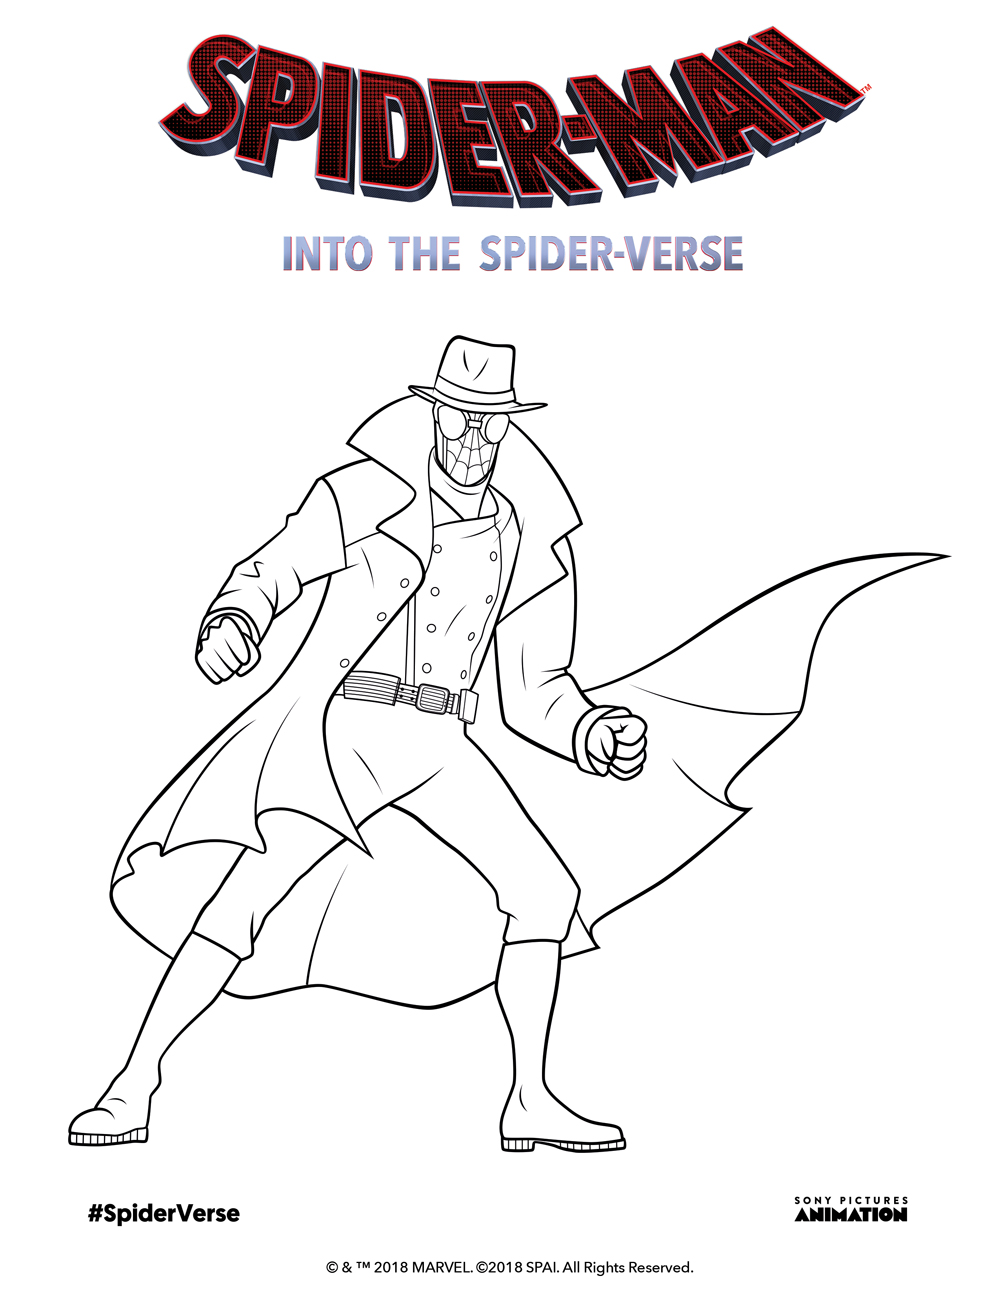 Coloring Pages and Activity Sheet for Spiderman Into the Spiderverse